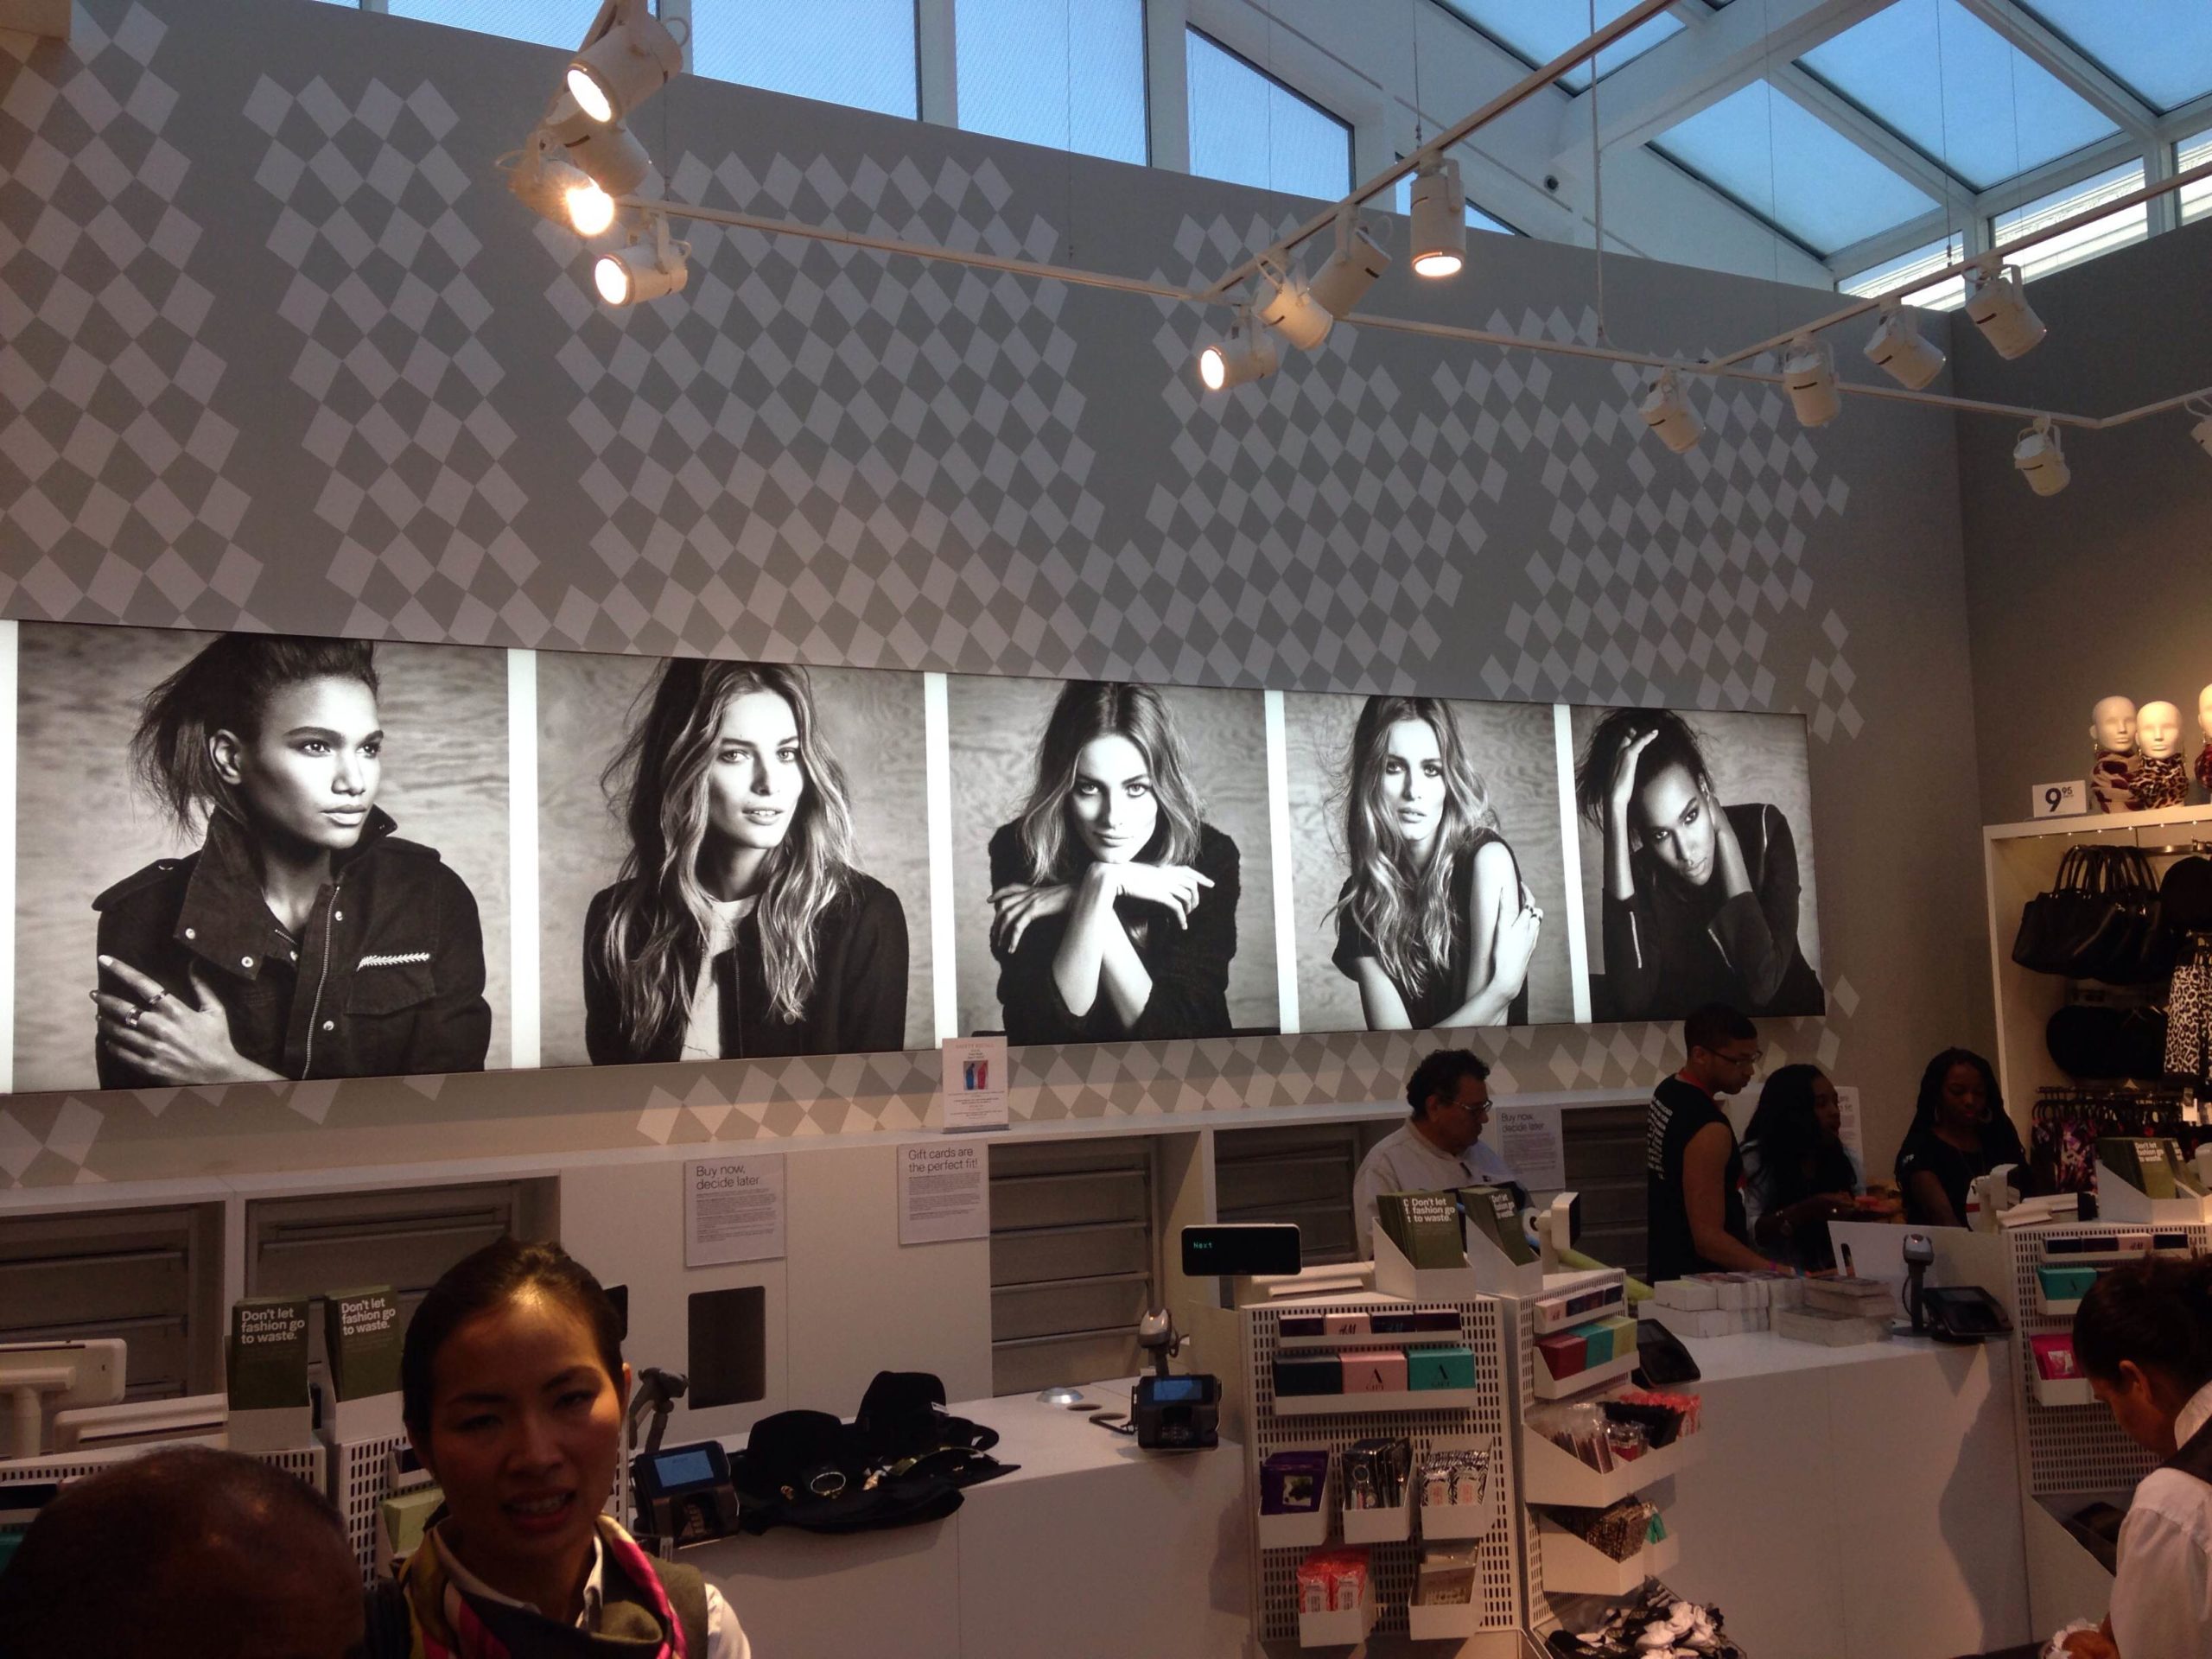 BiS in brief: H&M sets opening date at outlets